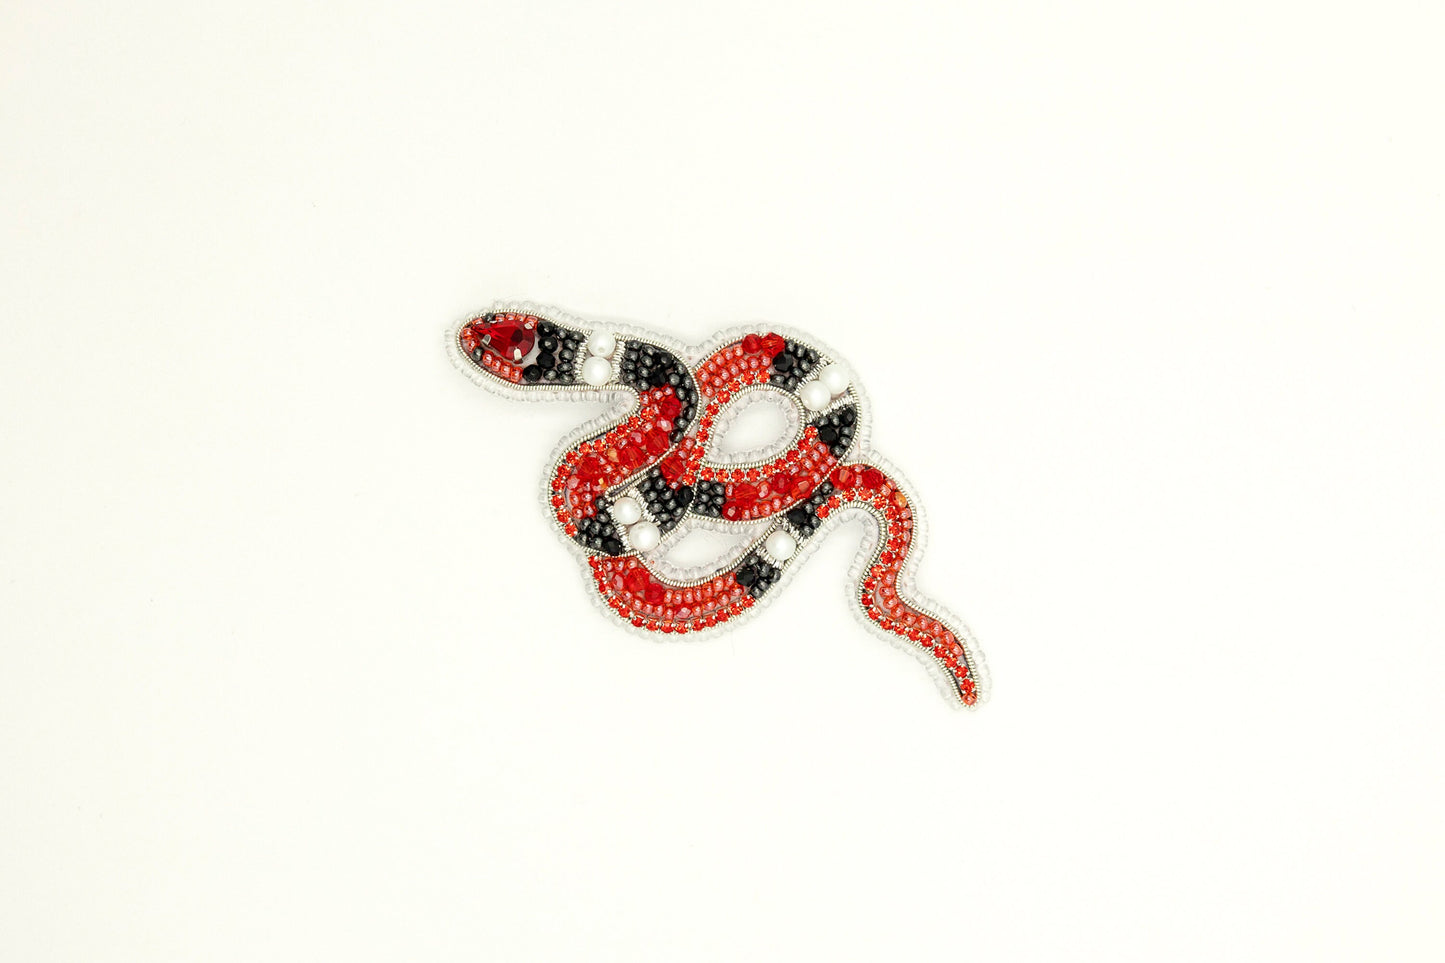 a red and black snake on a white background